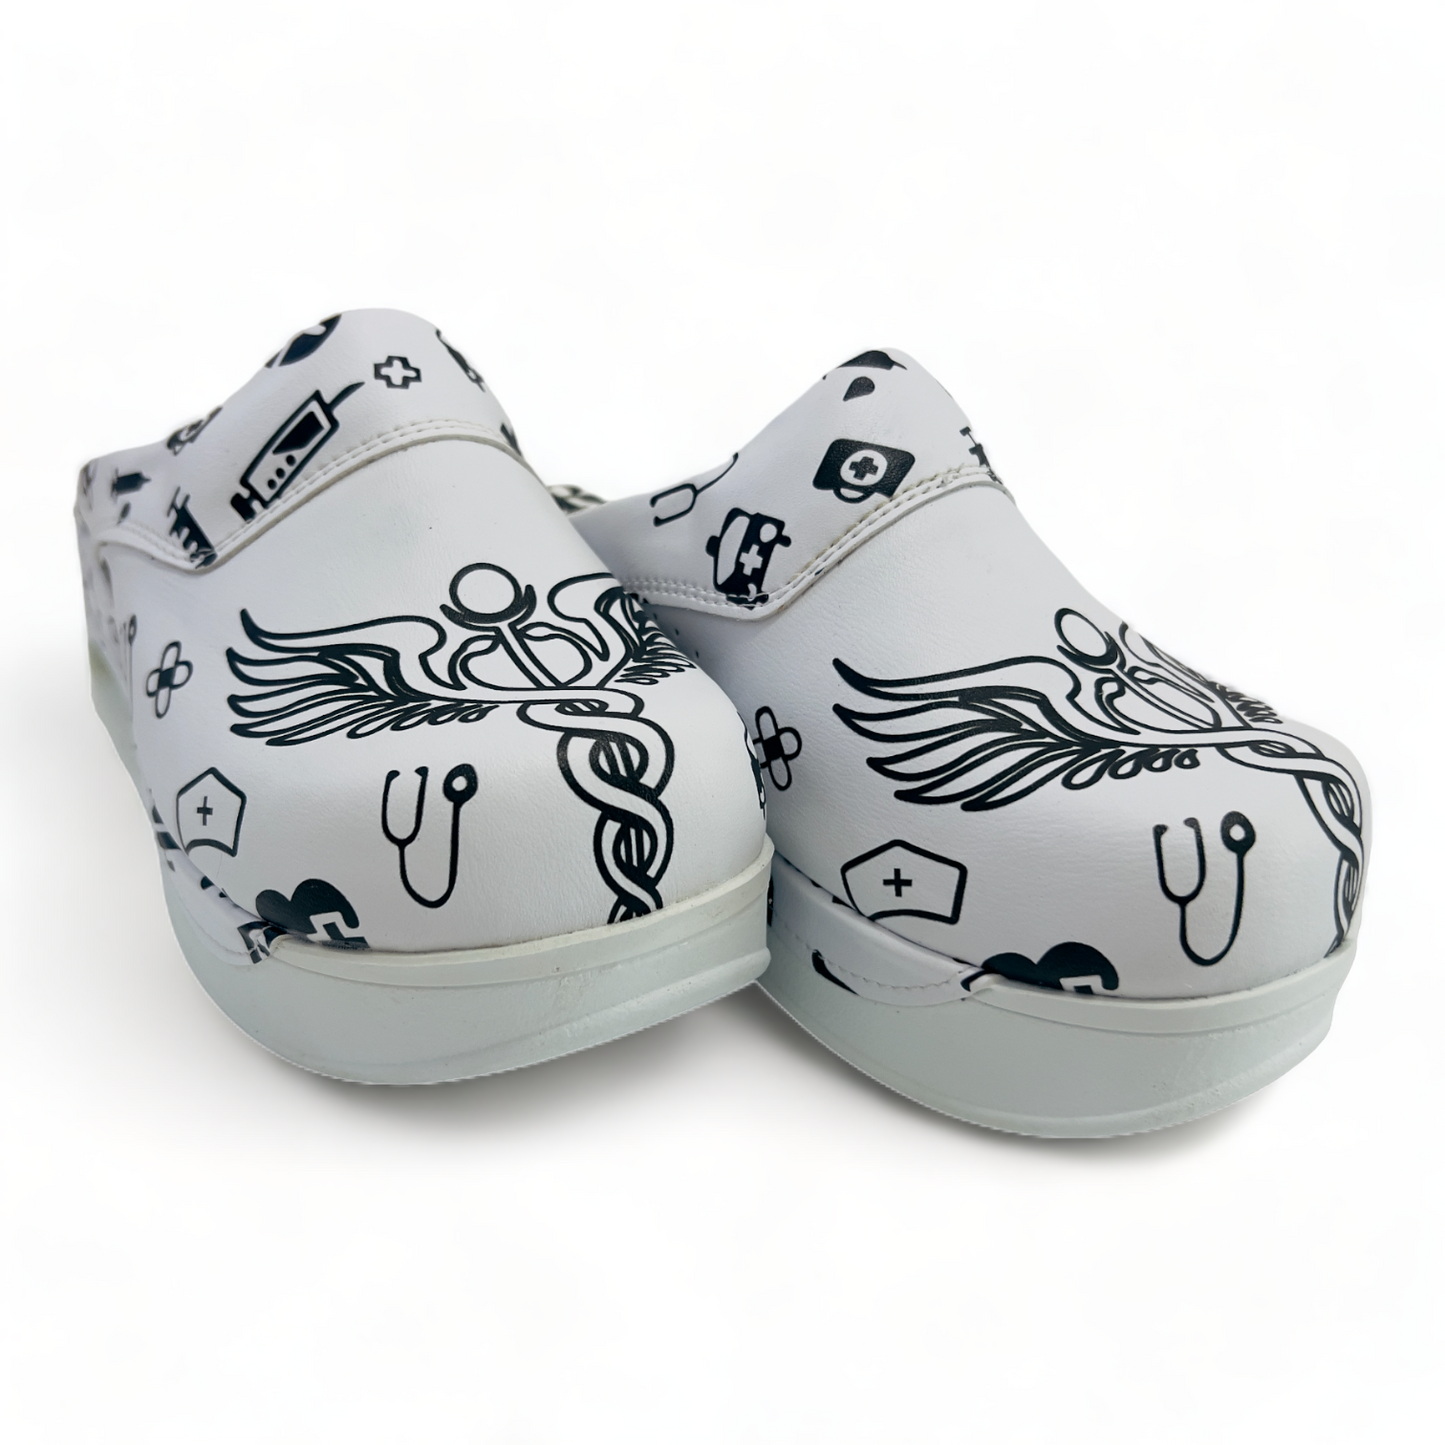 Orthopedic Medical Clogs, White with Print, Women - Model Airmax Medicine